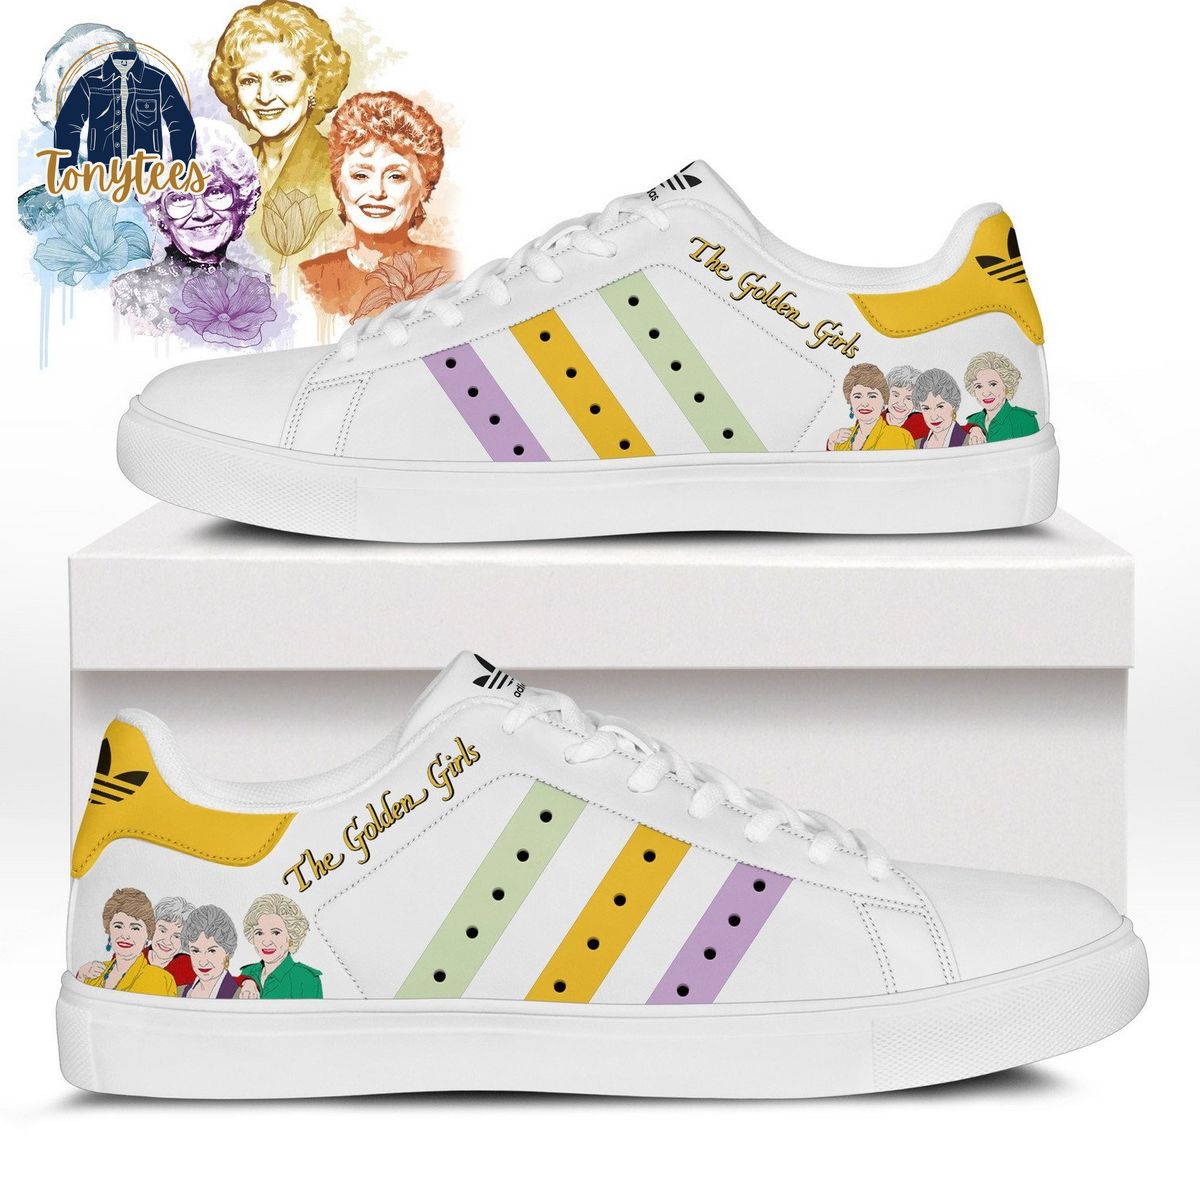 The Golden Girls adidas stan smith shoes